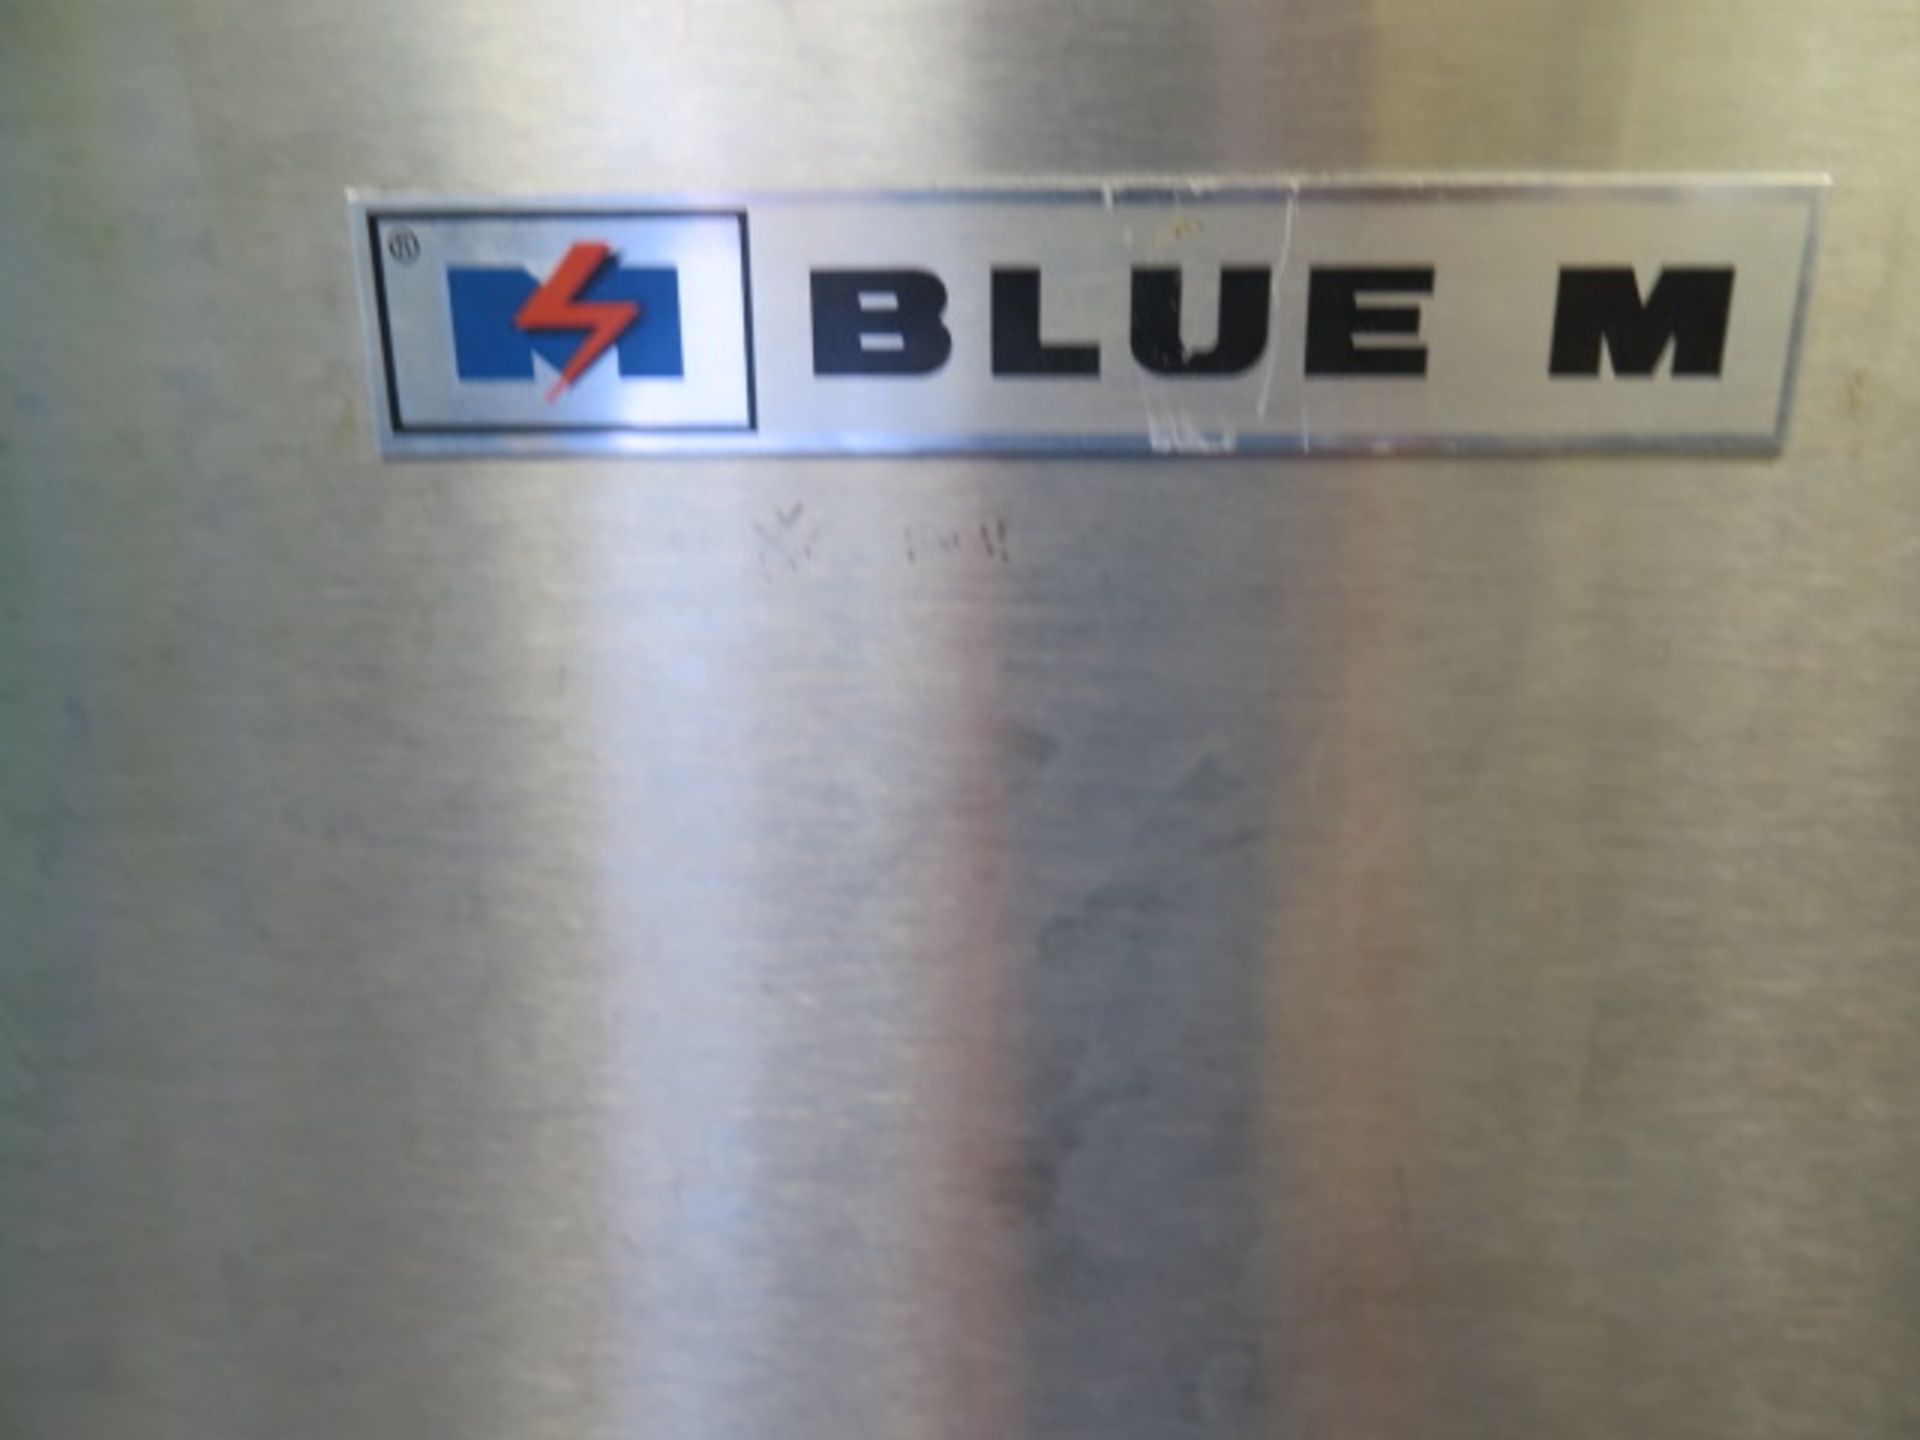 Blue-M OV-510A-2 38C to 260C / 500 Deg F Electric Oven s/n OV3-14172 (SOLD AS-IS - NO WARRANTY) - Image 3 of 6